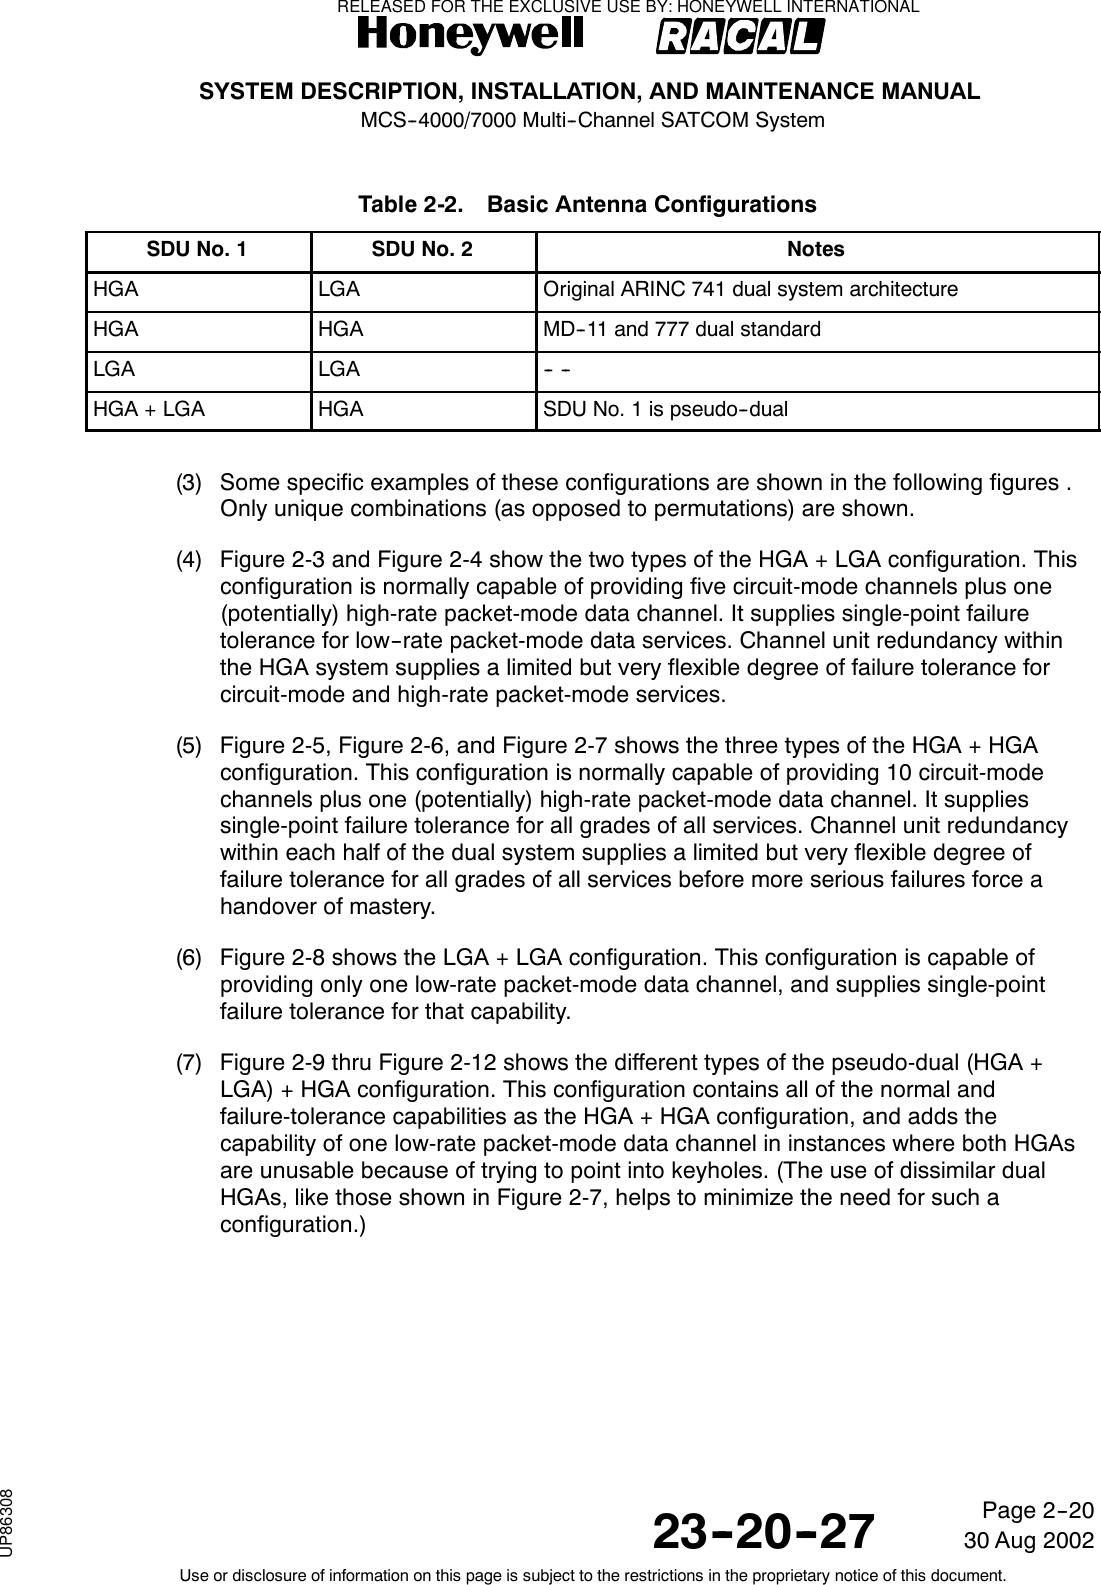 SYSTEM DESCRIPTION, INSTALLATION, AND MAINTENANCE MANUALMCS--4000/7000 Multi--Channel SATCOM System23--20--2730 Aug 2002Use or disclosure of information on this page is subject to the restrictions in the proprietary notice of this document.Page 2--20Table 2-2. Basic Antenna ConfigurationsSDU No. 1 SDU No. 2 NotesHGA LGA Original ARINC 741 dual system architectureHGA HGA MD--11 and 777 dual standardLGA LGA -- --HGA + LGA HGA SDU No. 1 is pseudo--dual(3) Some specific examples of these configurations are shown in the following figures .Only unique combinations (as opposed to permutations) are shown.(4) Figure 2-3 and Figure 2-4 show the two types of the HGA + LGA configuration. Thisconfiguration is normally capable of providing five circuit-mode channels plus one(potentially) high-rate packet-mode data channel. It supplies single-point failuretolerance for low--rate packet-mode data services. Channel unit redundancy withinthe HGA system supplies a limited but very flexible degree of failure tolerance forcircuit-mode and high-rate packet-mode services.(5) Figure 2-5, Figure 2-6, and Figure 2-7 shows the three types of the HGA + HGAconfiguration. This configuration is normally capable of providing 10 circuit-modechannels plus one (potentially) high-rate packet-mode data channel. It suppliessingle-point failure tolerance for all grades of all services. Channel unit redundancywithin each half of the dual system supplies a limited but very flexible degree offailure tolerance for all grades of all services before more serious failures force ahandover of mastery.(6) Figure 2-8 shows the LGA + LGA configuration. This configuration is capable ofproviding only one low-rate packet-mode data channel, and supplies single-pointfailure tolerance for that capability.(7) Figure 2-9 thru Figure 2-12 shows the different types of the pseudo-dual (HGA +LGA) + HGA configuration. This configuration contains all of the normal andfailure-tolerance capabilities as the HGA + HGA configuration, and adds thecapability of one low-rate packet-mode data channel in instances where both HGAsare unusable because of trying to point into keyholes. (The use of dissimilar dualHGAs, like those shown in Figure 2-7, helps to minimize the need for such aconfiguration.)RELEASED FOR THE EXCLUSIVE USE BY: HONEYWELL INTERNATIONALUP86308